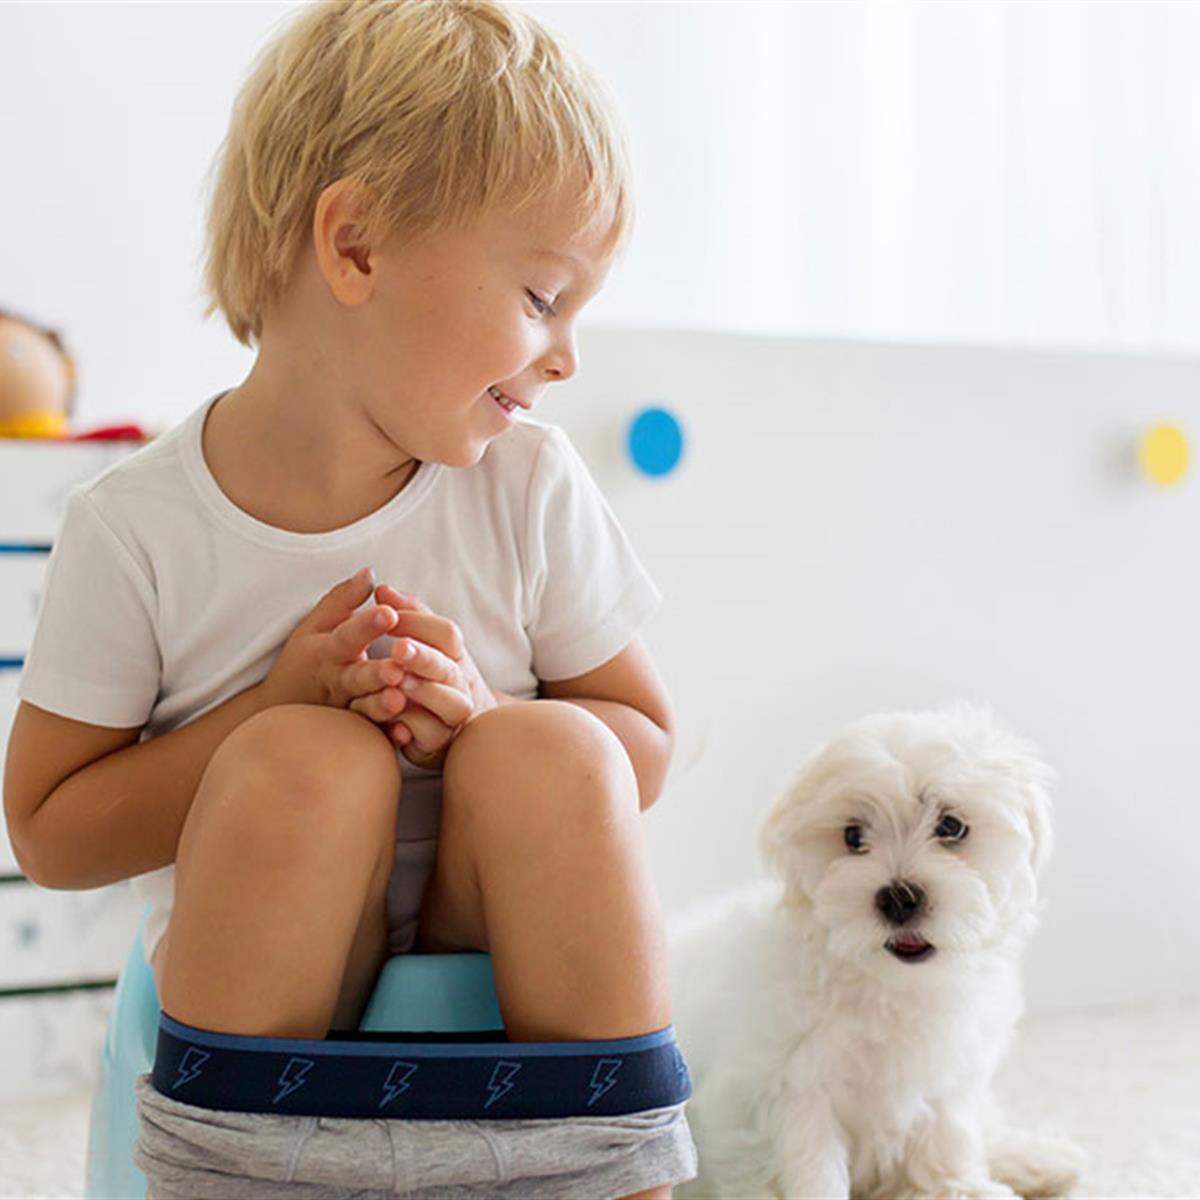 can you teach your dog to use the toilet